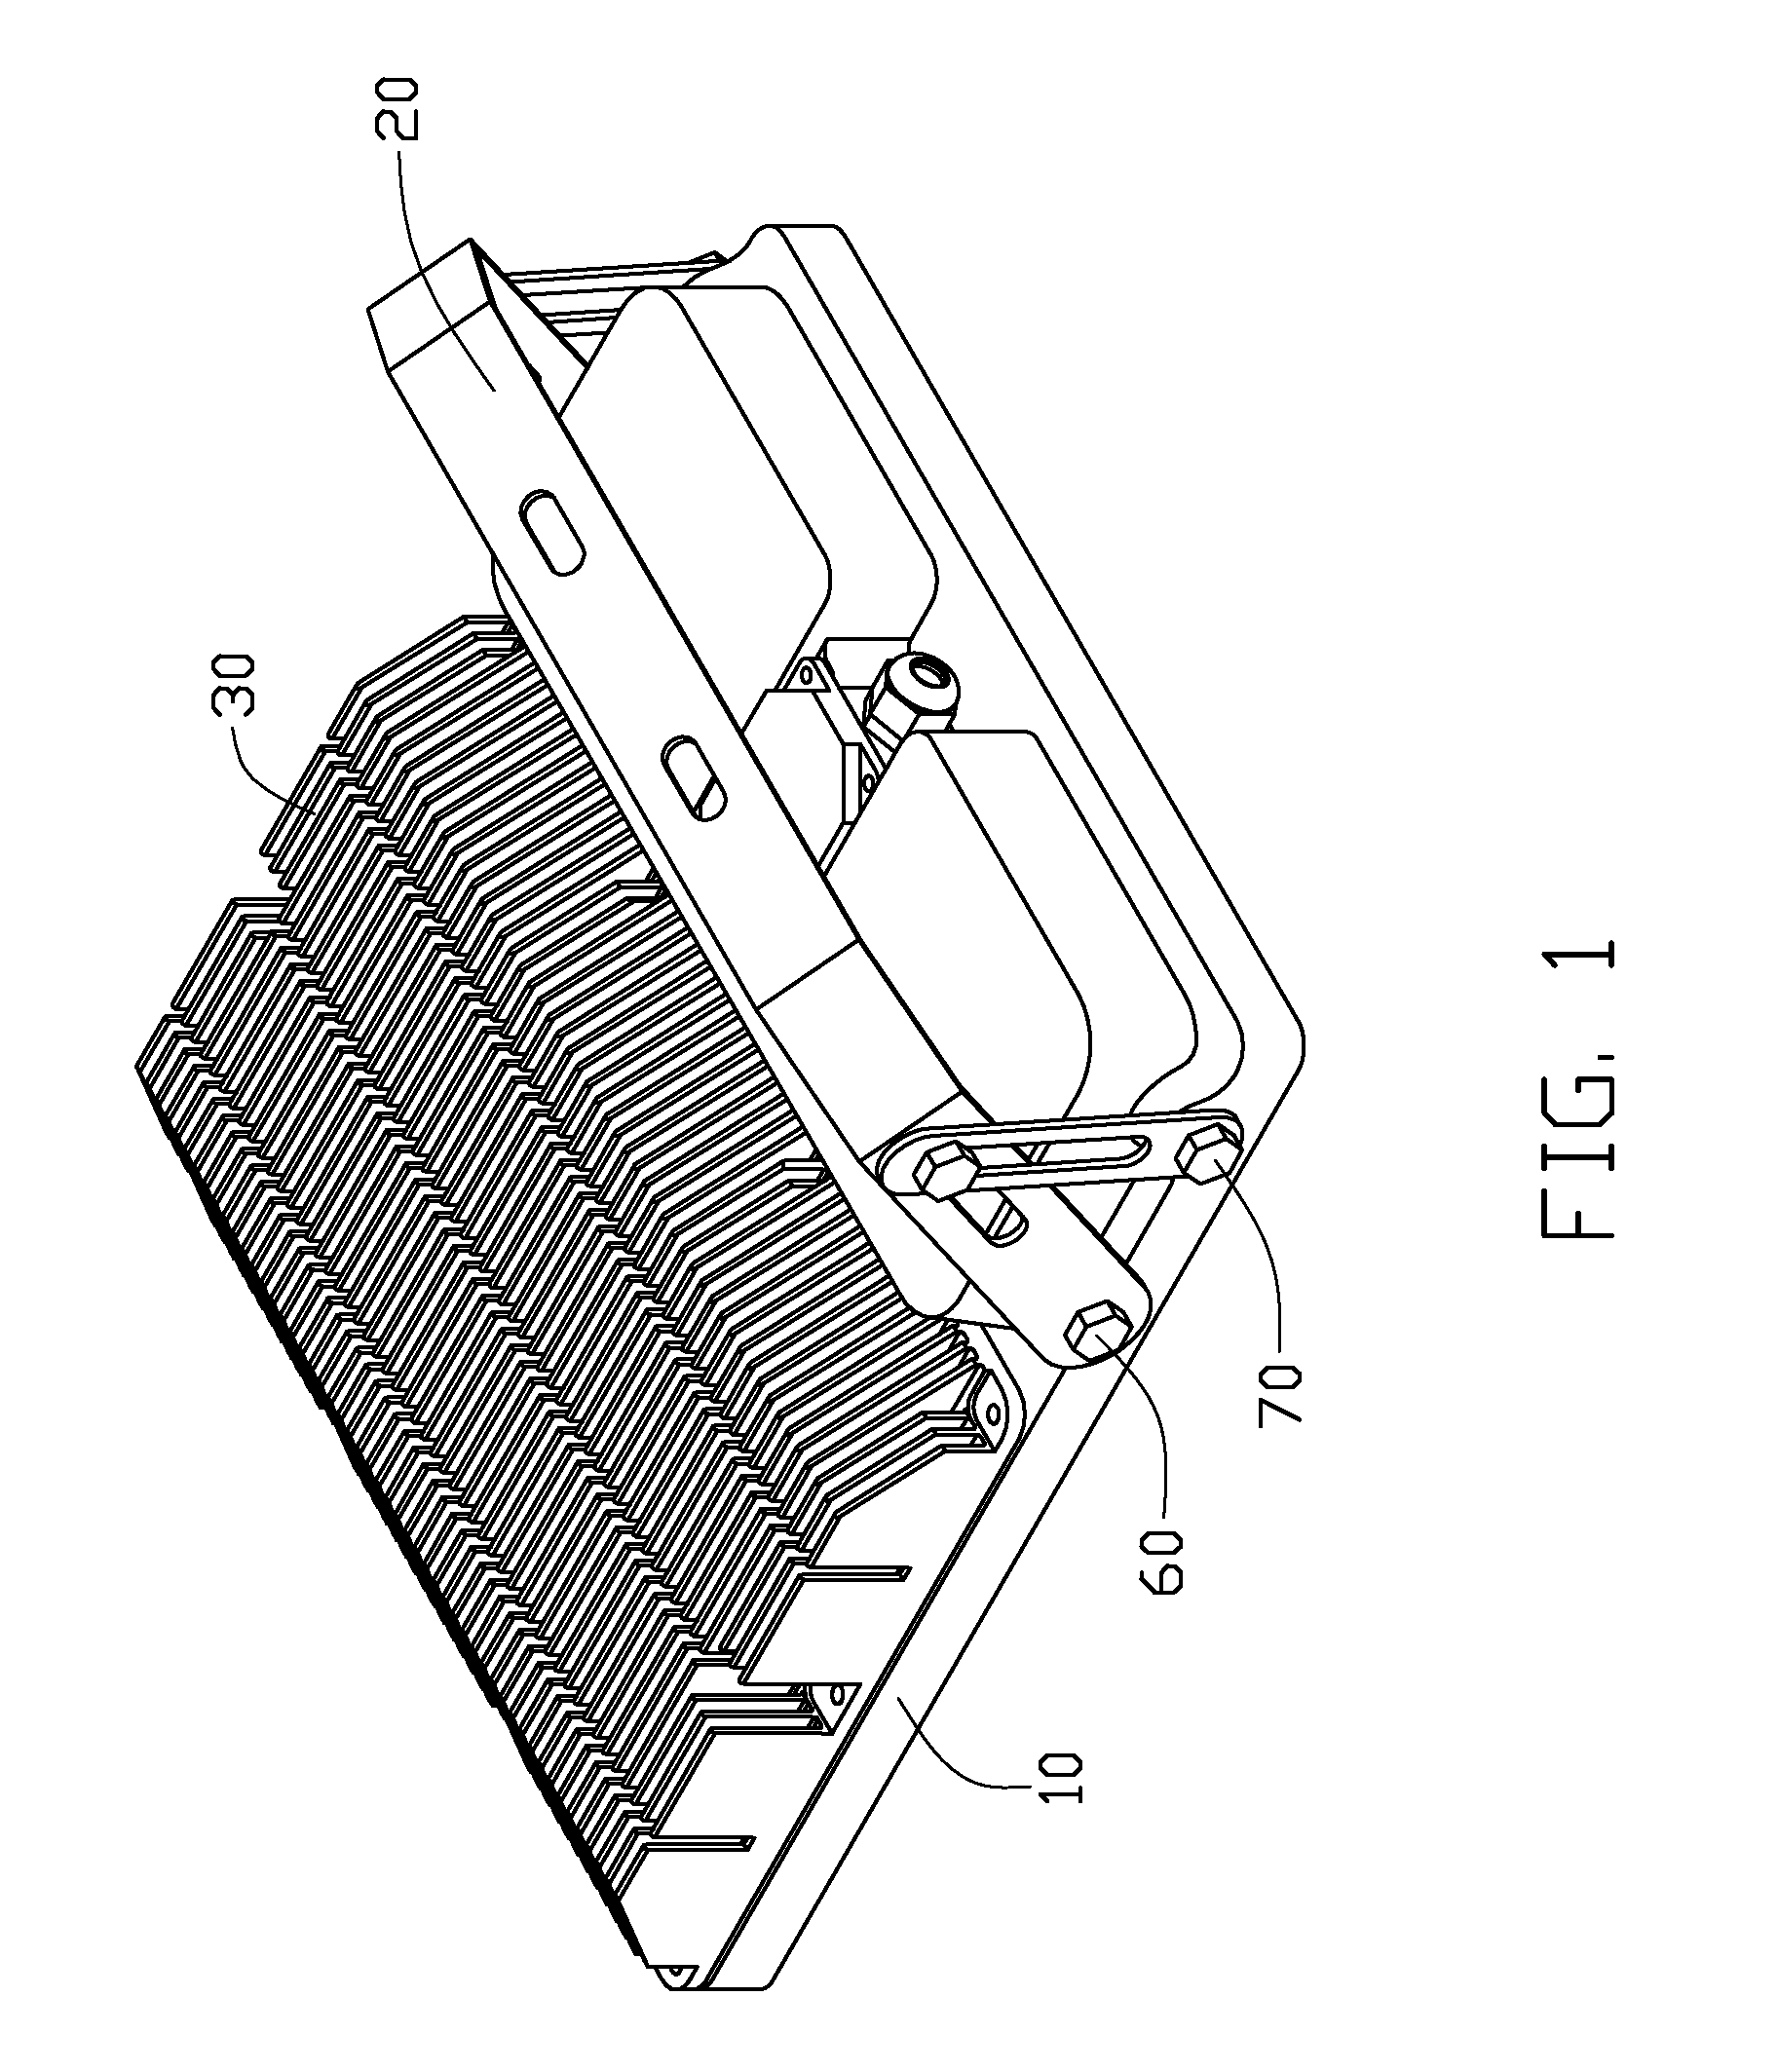 Flood lamp assembly having a reinforced bracket for supporting a weight thereof